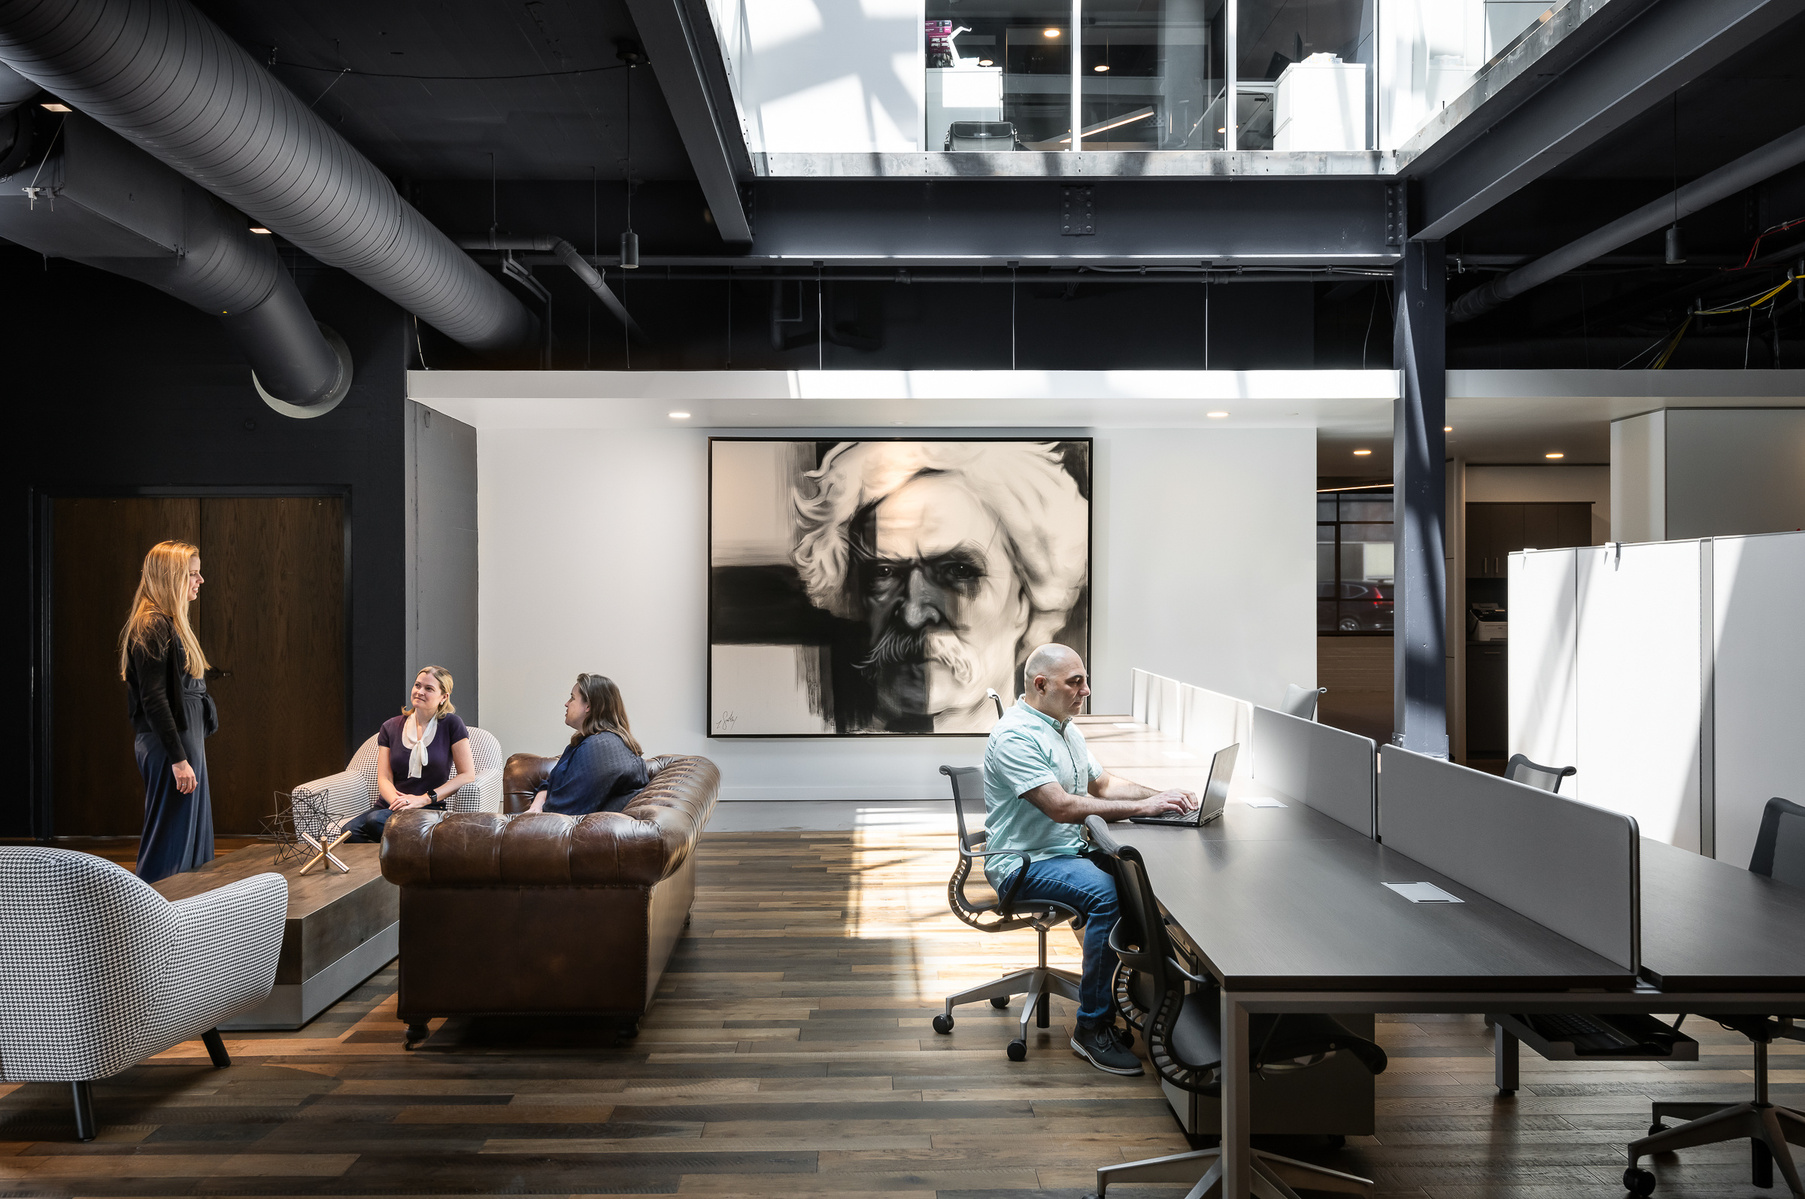 Commercial Architecture Photography of people in an open work space, with artwork of Mark Twain on feature wall